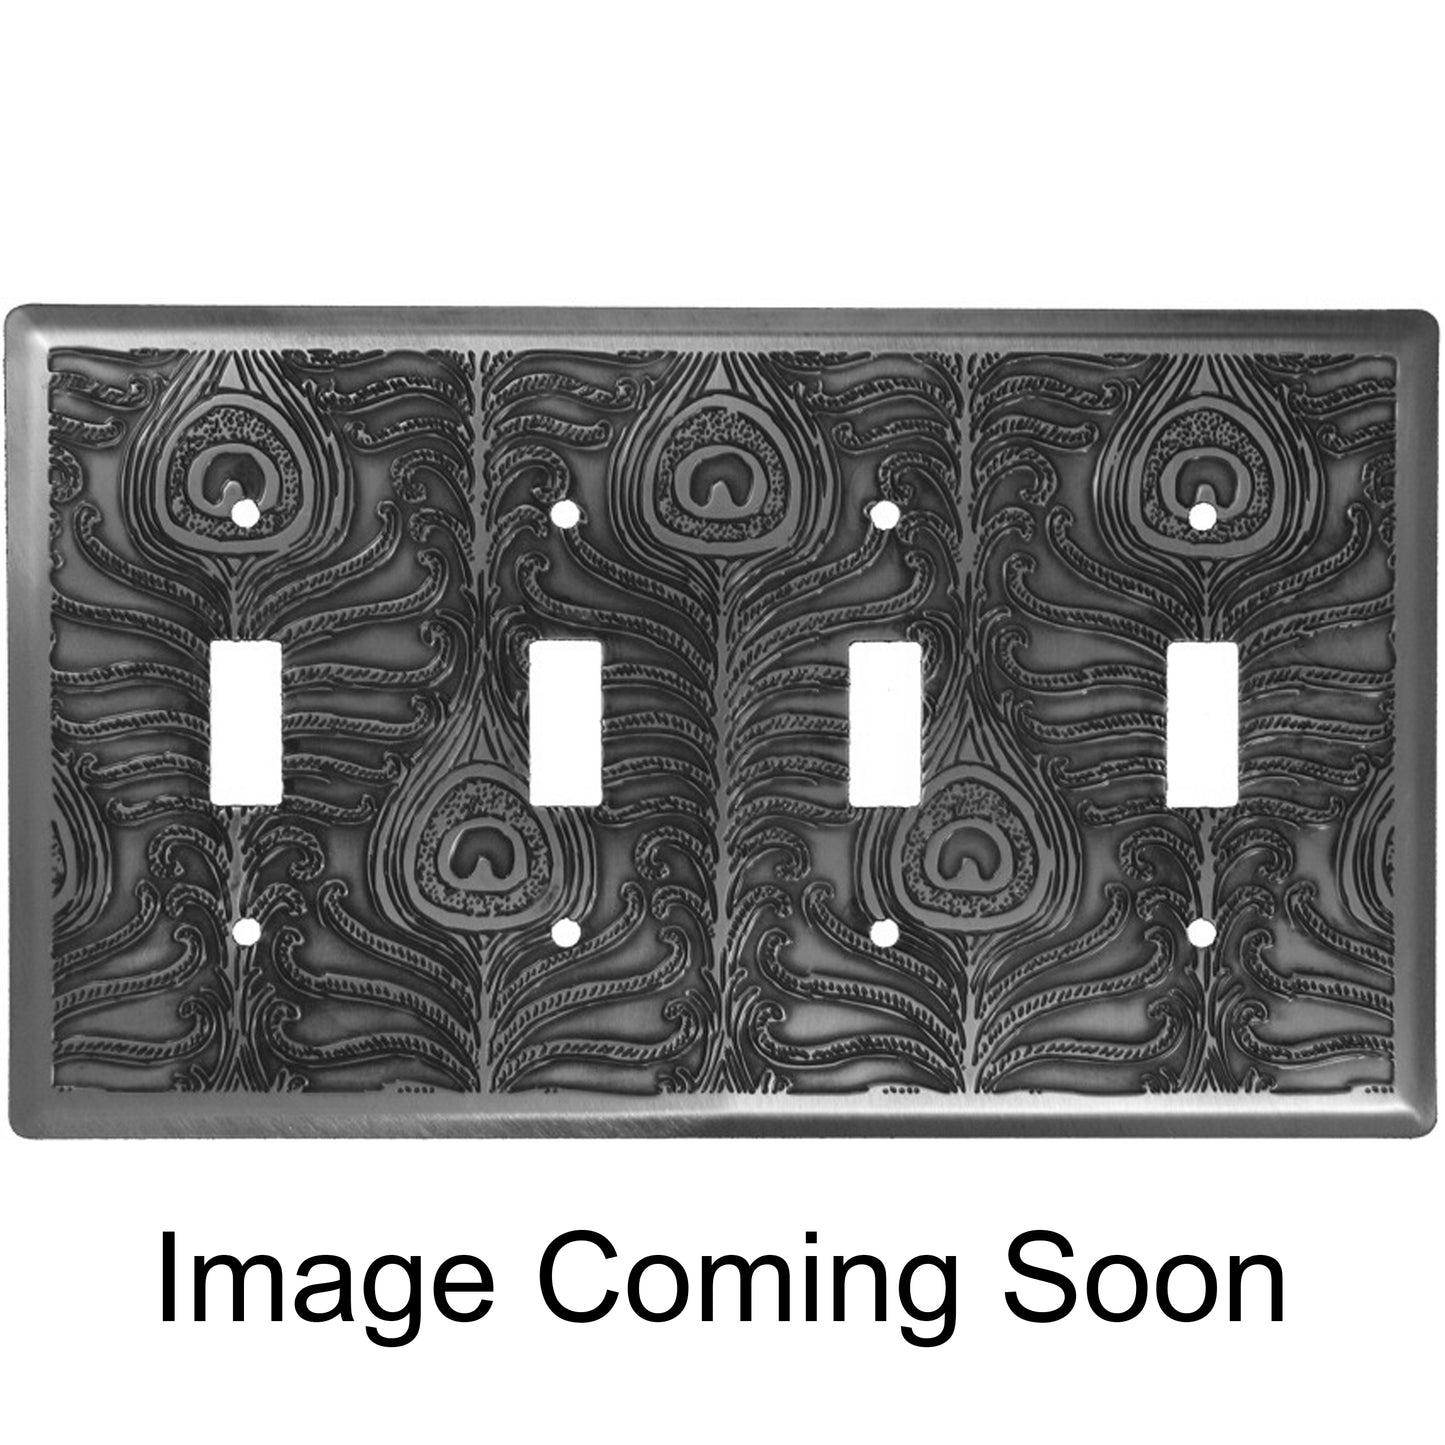 Peacock Stainless Steel 4 Toggle Switchplate